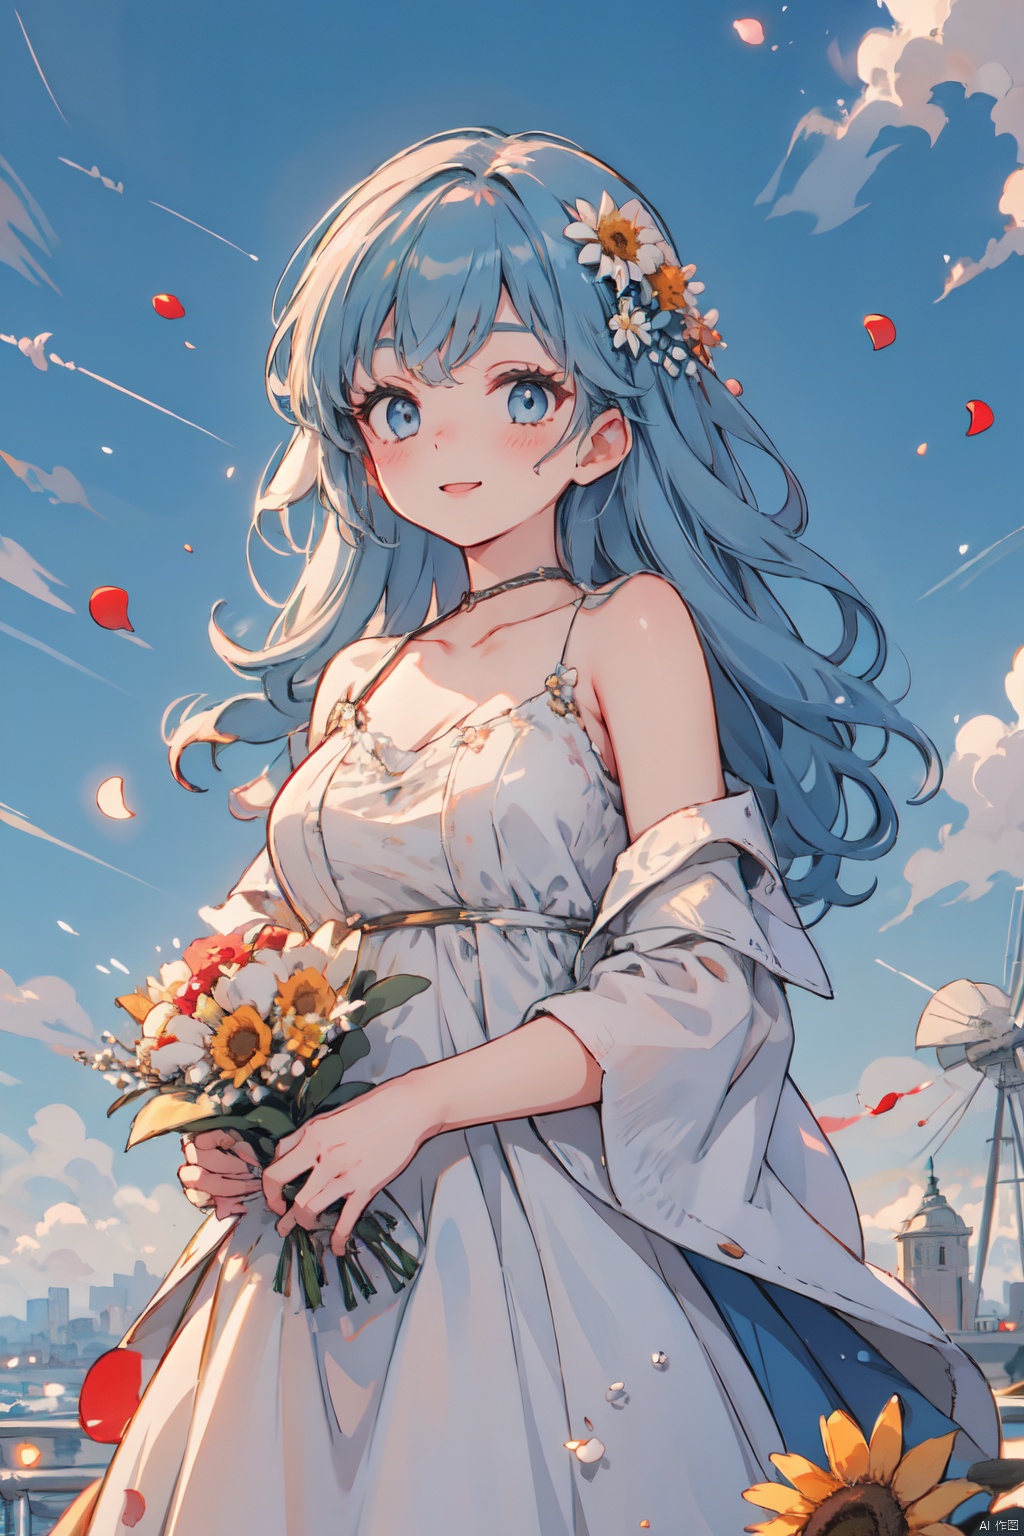  1 girl,flowers (innocent grey),Sky blue hair,standing,1girl, bangs, blue_sky, blush, bouquet, breasts, city, cityscape, cloud, cloudy_sky, collarbone, confetti, daisy, day, falling_petals, fence, ferris_wheel, field, flower, flower_field, hair_ornament, hairclip, holding, holding_flower, house, jacket, leaves_in_wind, long_hair, long_sleeves, looking_at_viewer, open_clothes, open_jacket, outdoors, petals, rose_petals, sky, skyline, skyscraper, smile, solo, sunflower, tower, upper_body, wind, windmill, yellow_flower, (wide shot, mid shot, panorama), blurry,Nebula, flowing skirts,（smoke）,Giant flowers, light master, (\shen ming shao nv\)